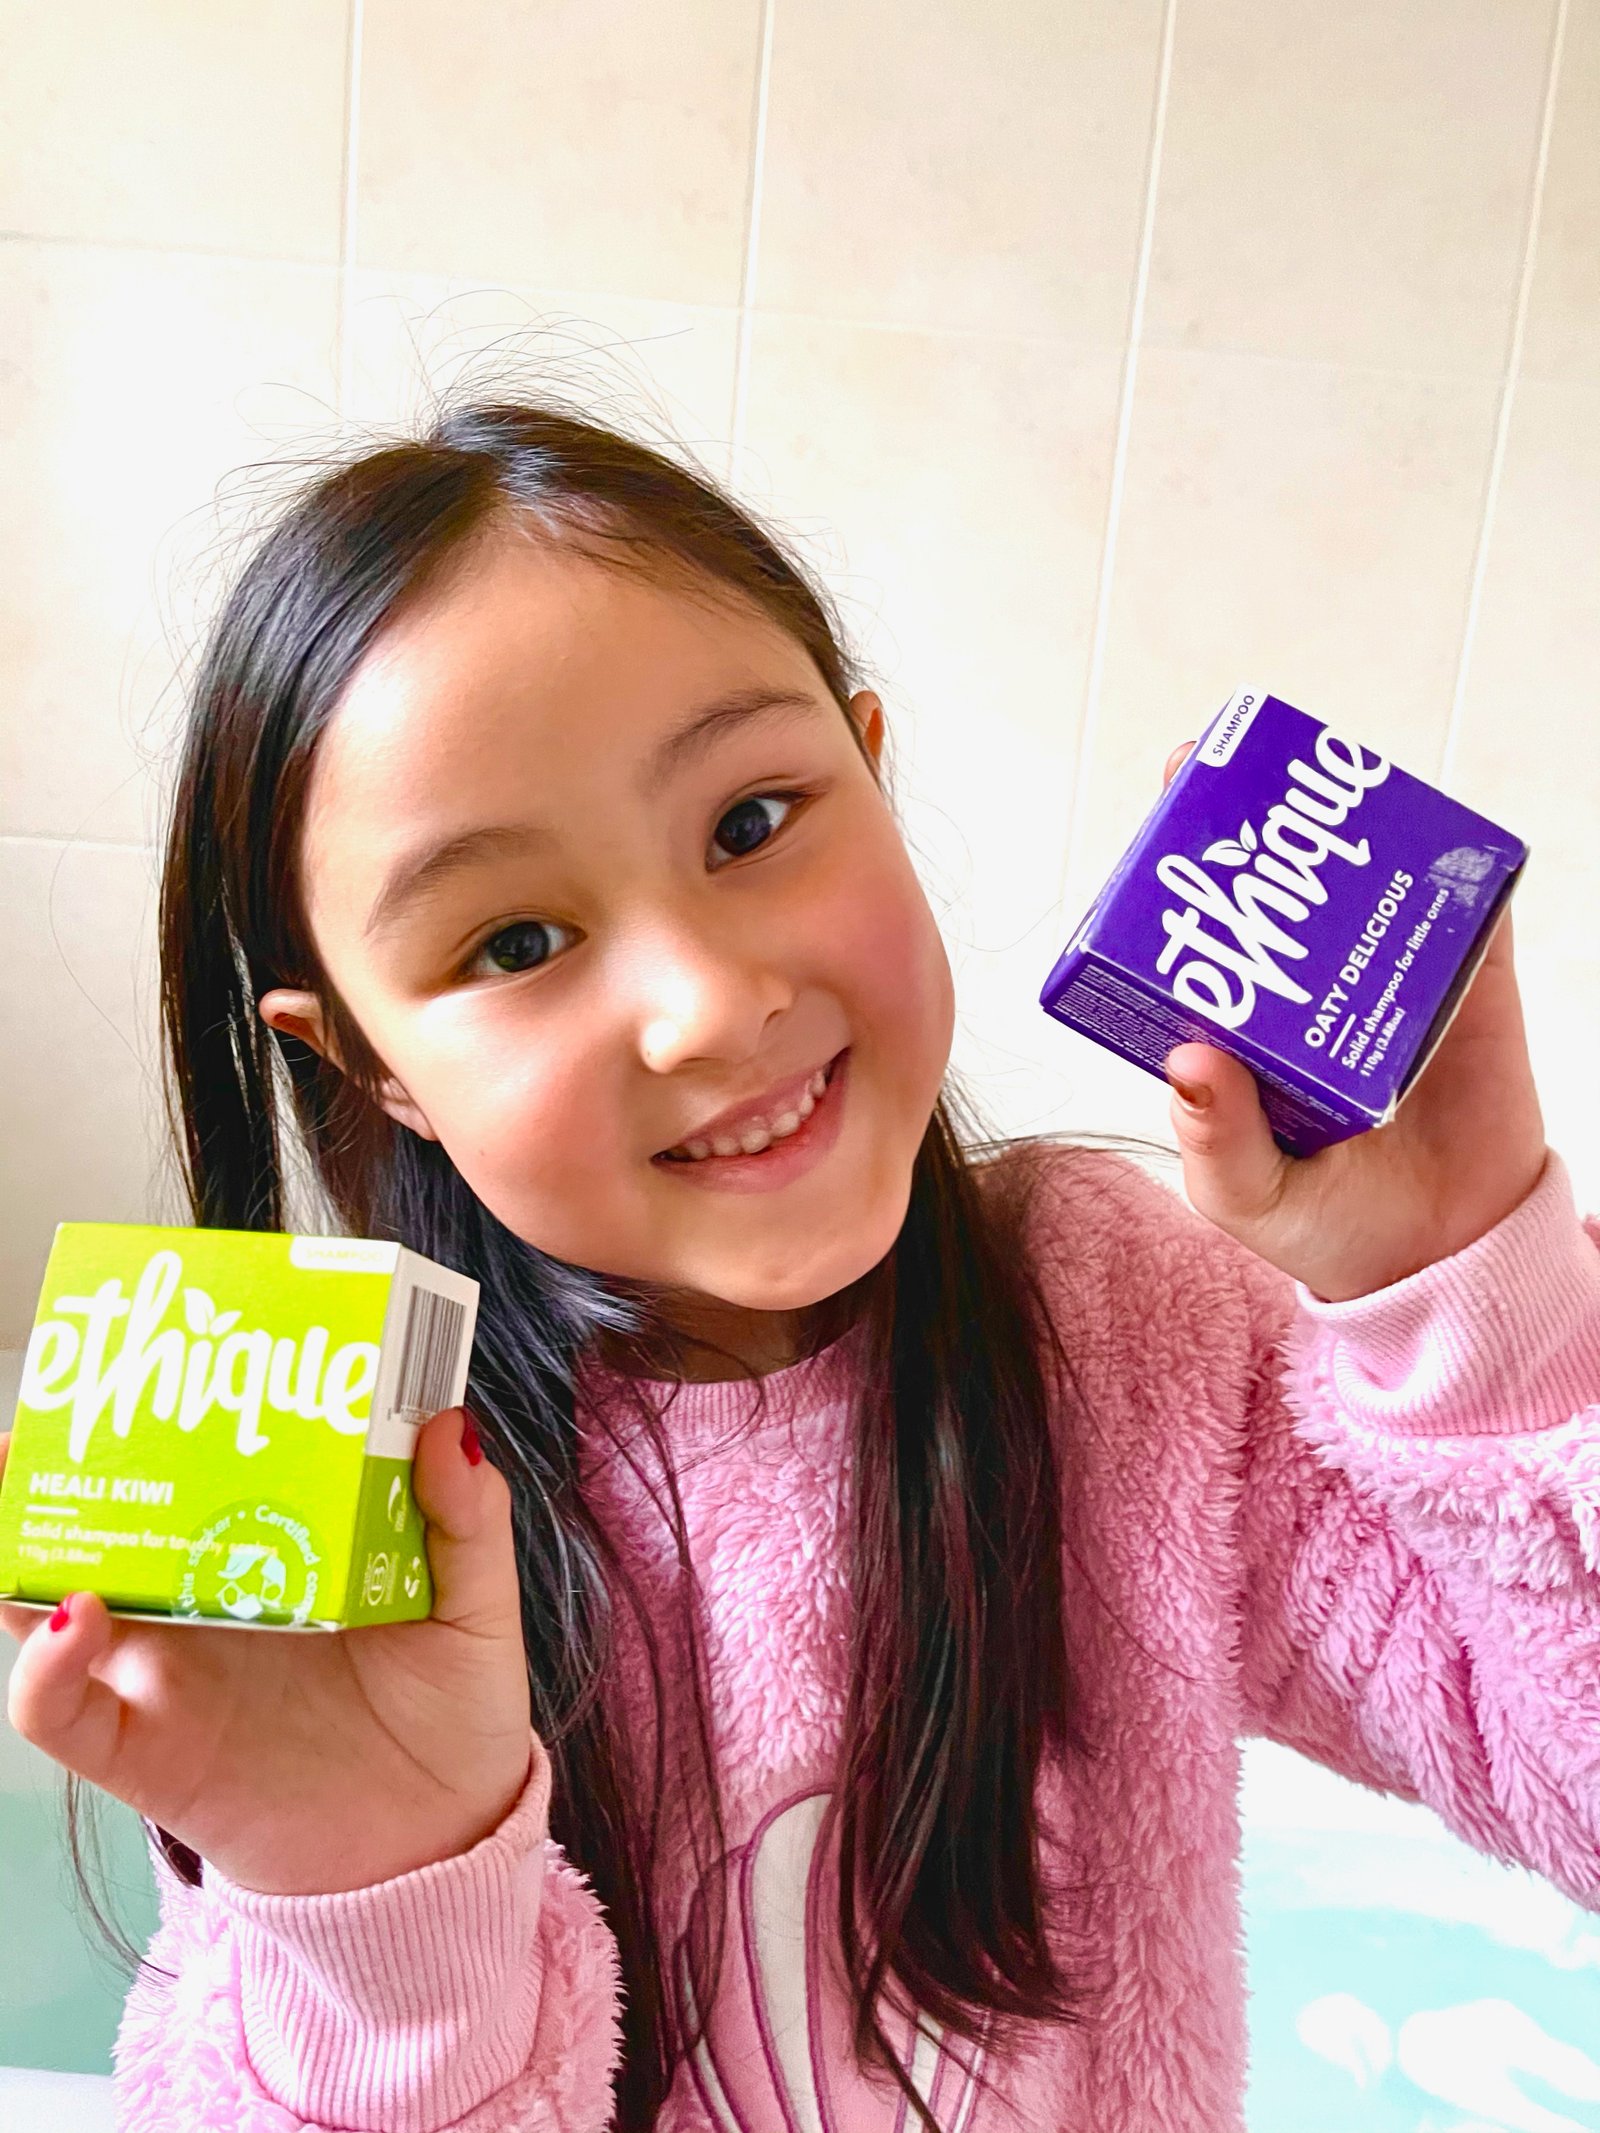 Yasmin showing her Ethique Oaty Delicious kids shampoo bar made with coconut oil, oats and lavender in our bathroom. She is also showing the bright green ethique heali kiwi shampoo bar that I use for my dry scalp.